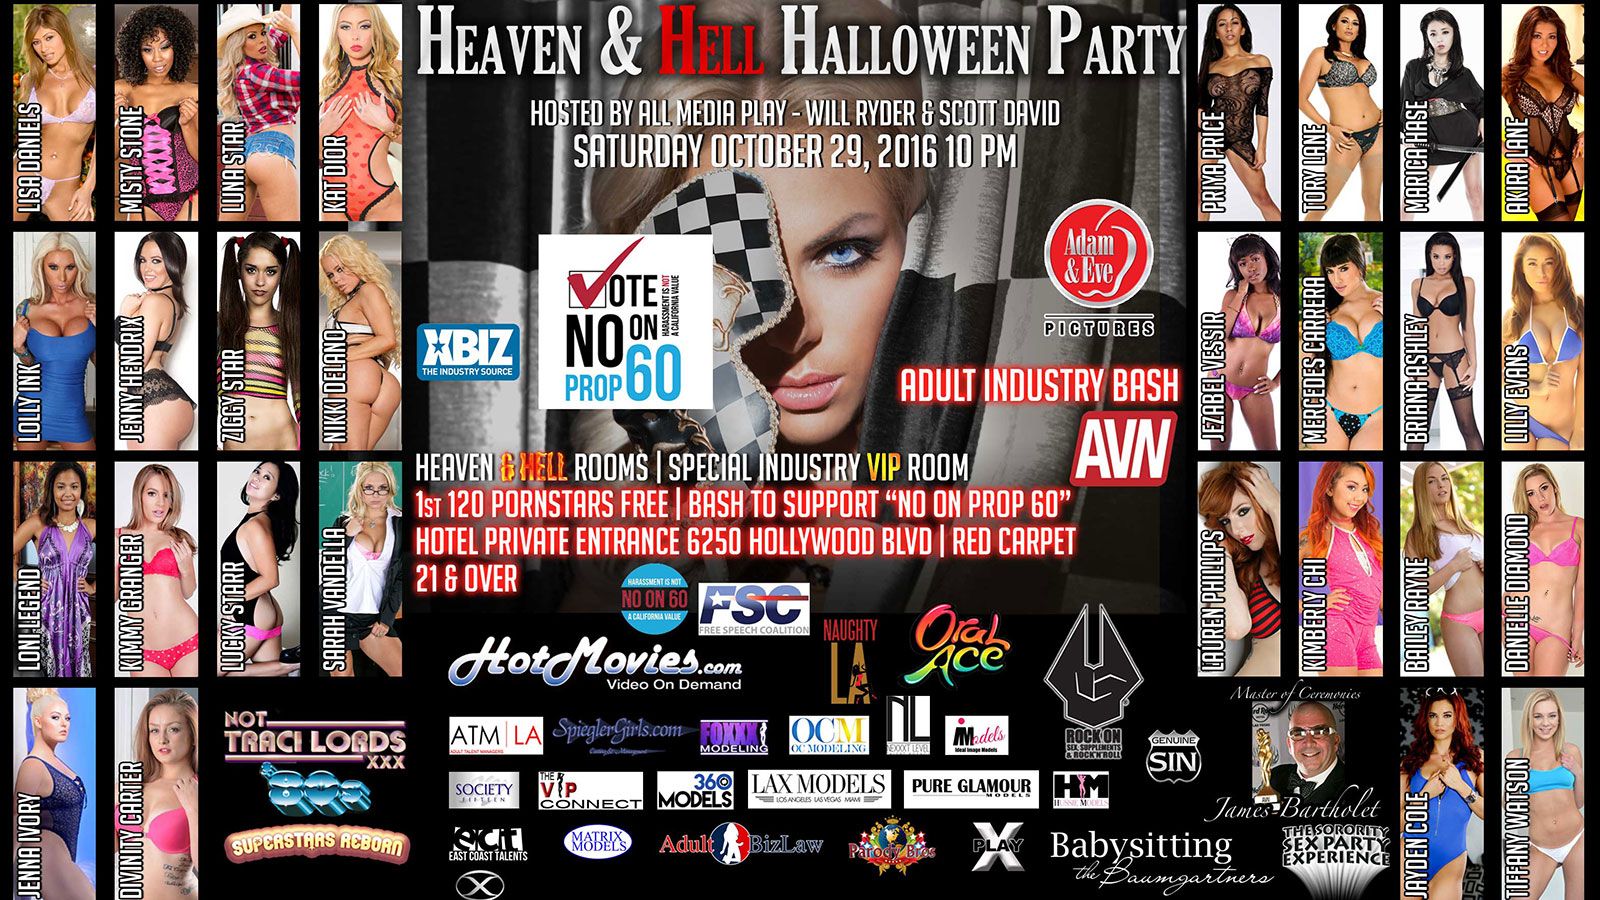 Support 'No on Prop 60' at Adult Biz Halloween Party Saturday, Oct. 29